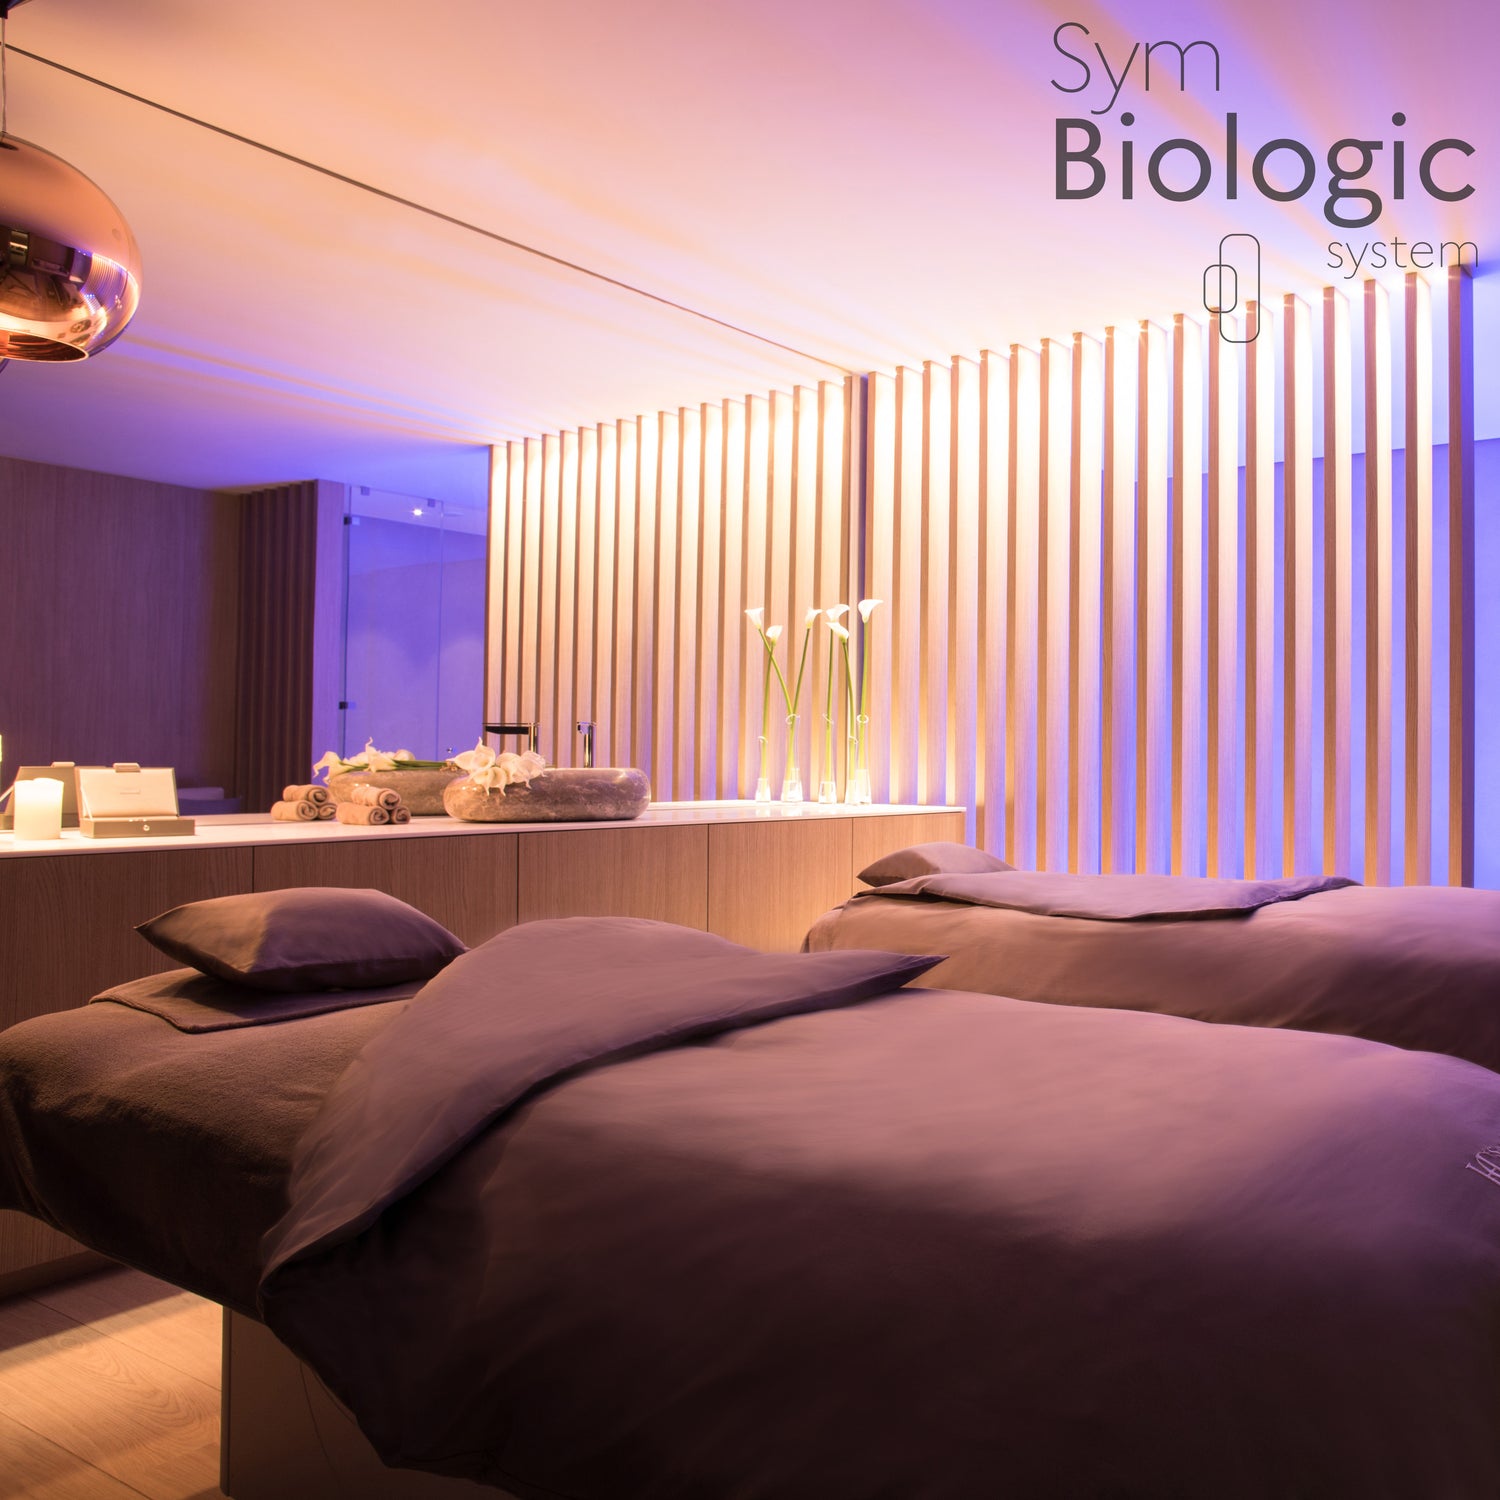 Image of a relaxing duo treatment cabin, designed for couples or friends to enjoy spa treatments together in a serene and intimate setting.